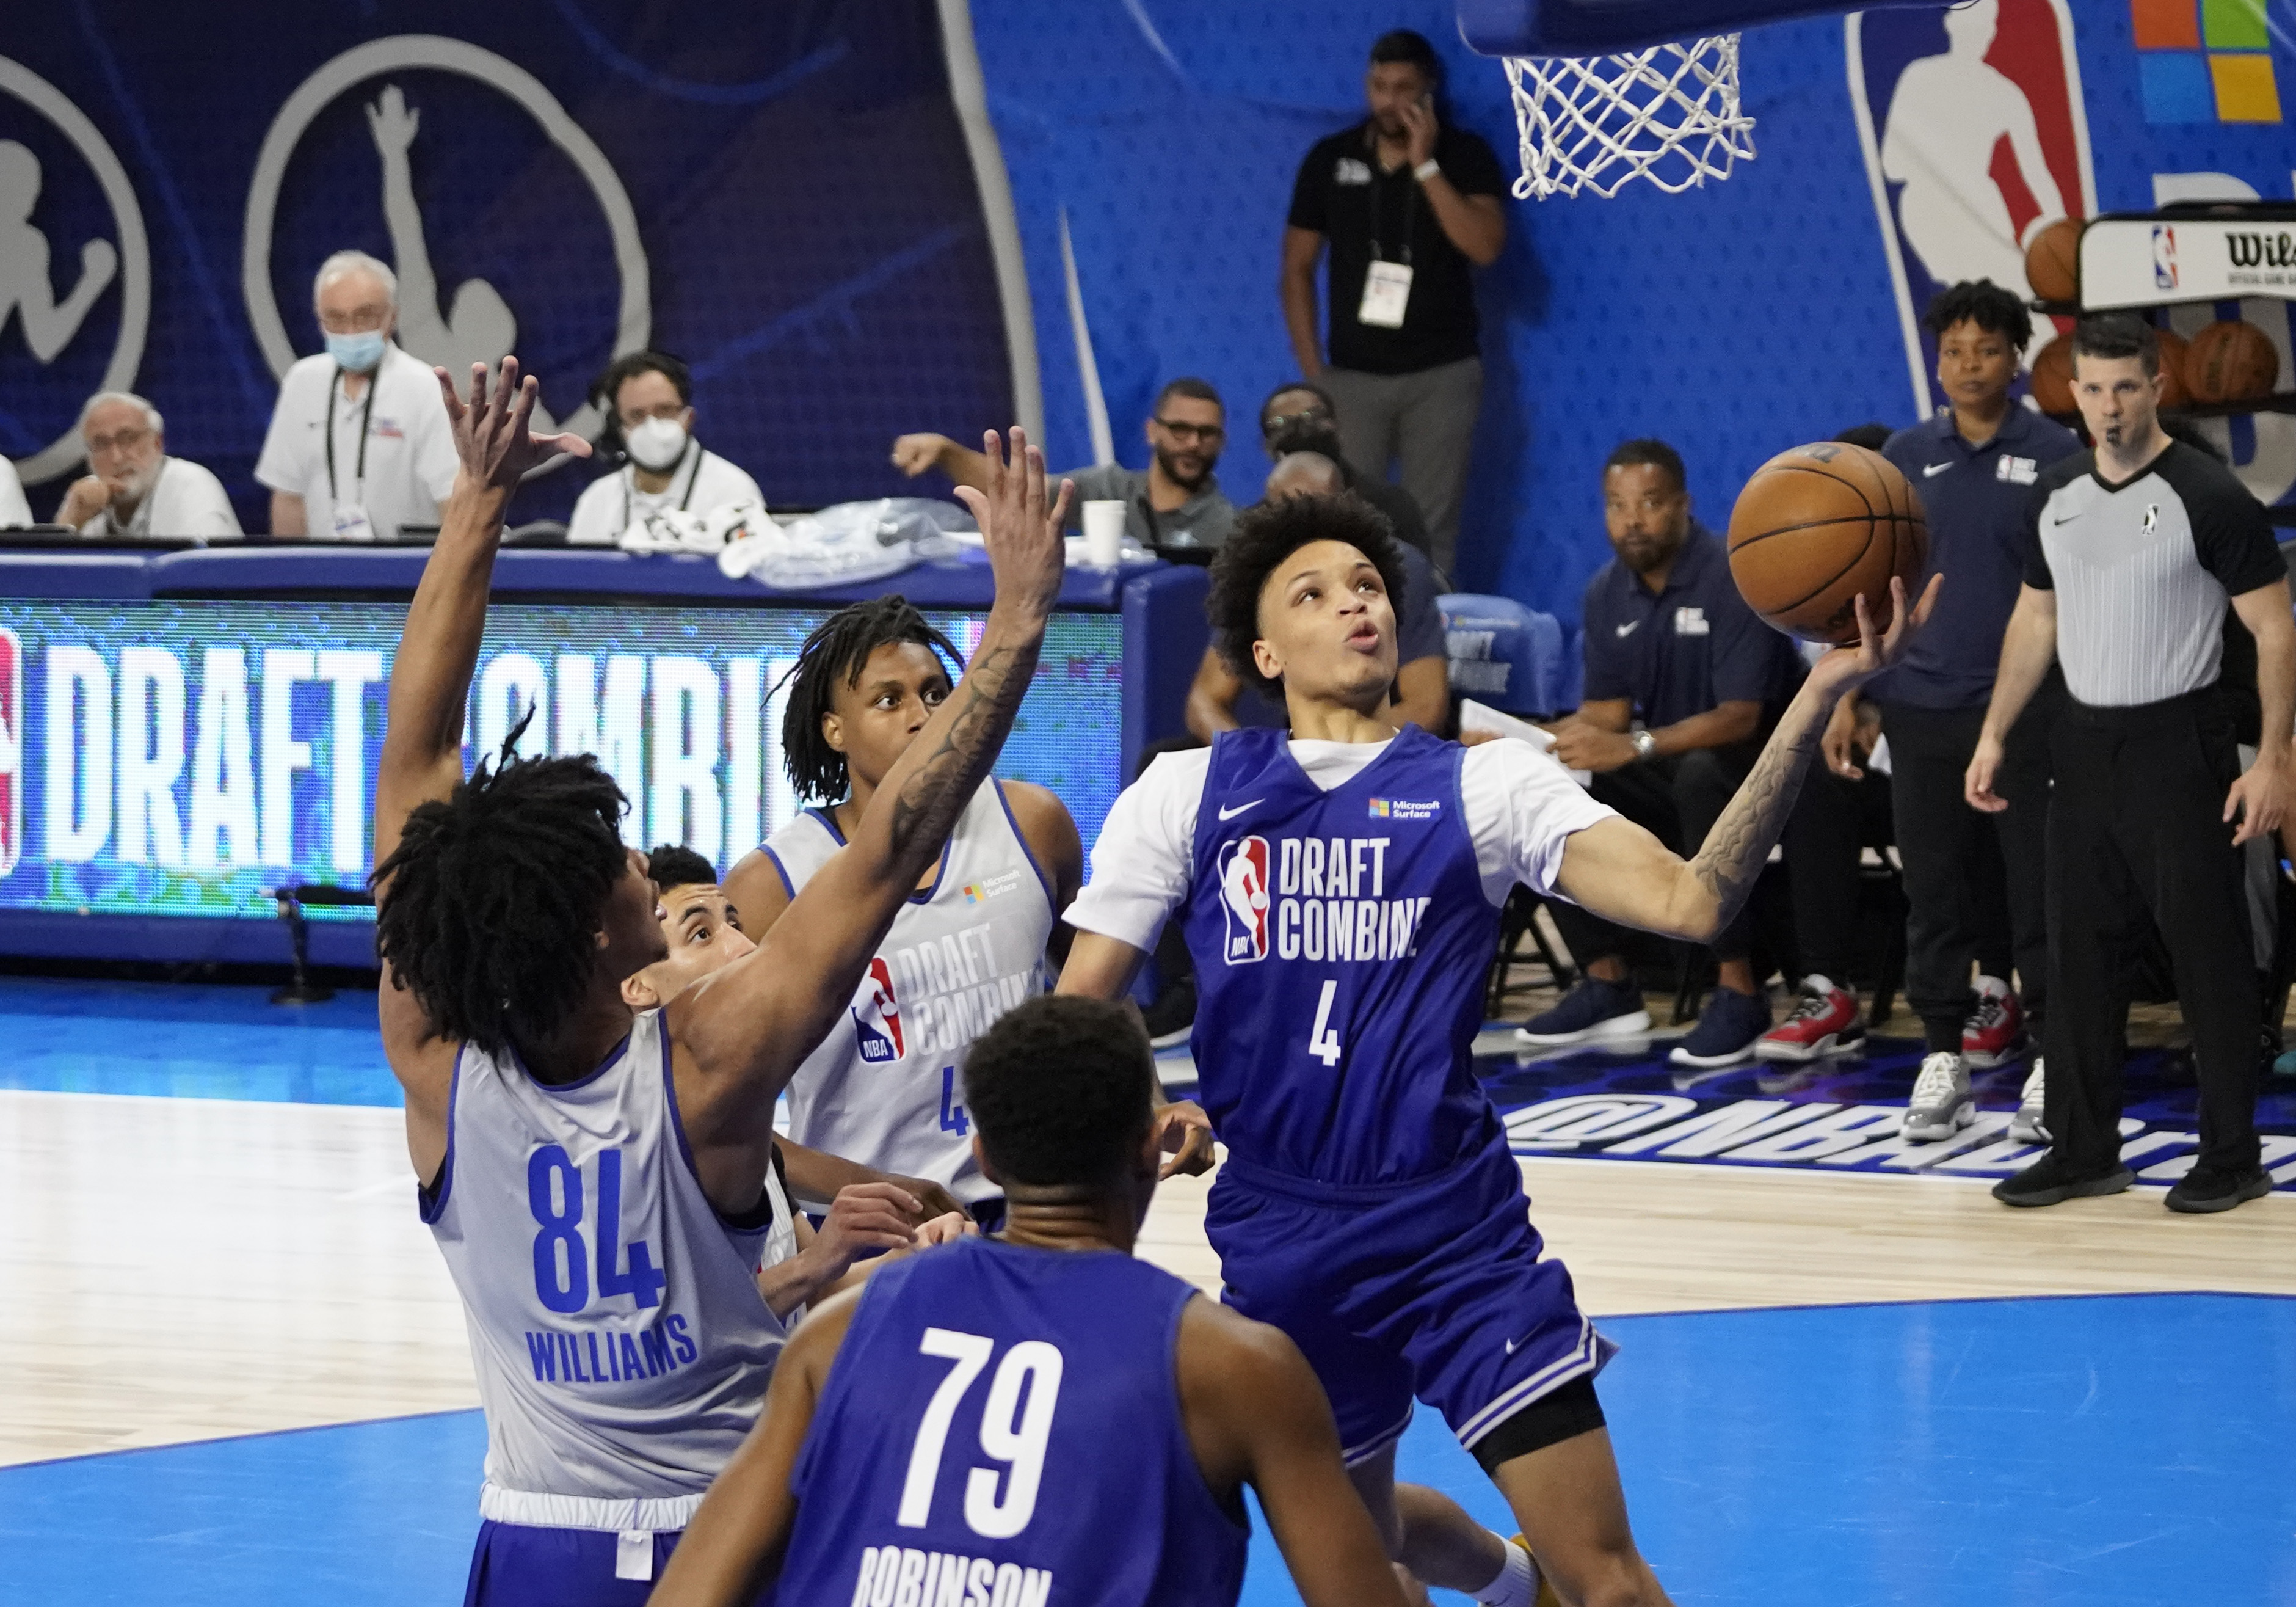 NBA Draft 2022: NBA Draft Combine notebook and takeaways - Page 2